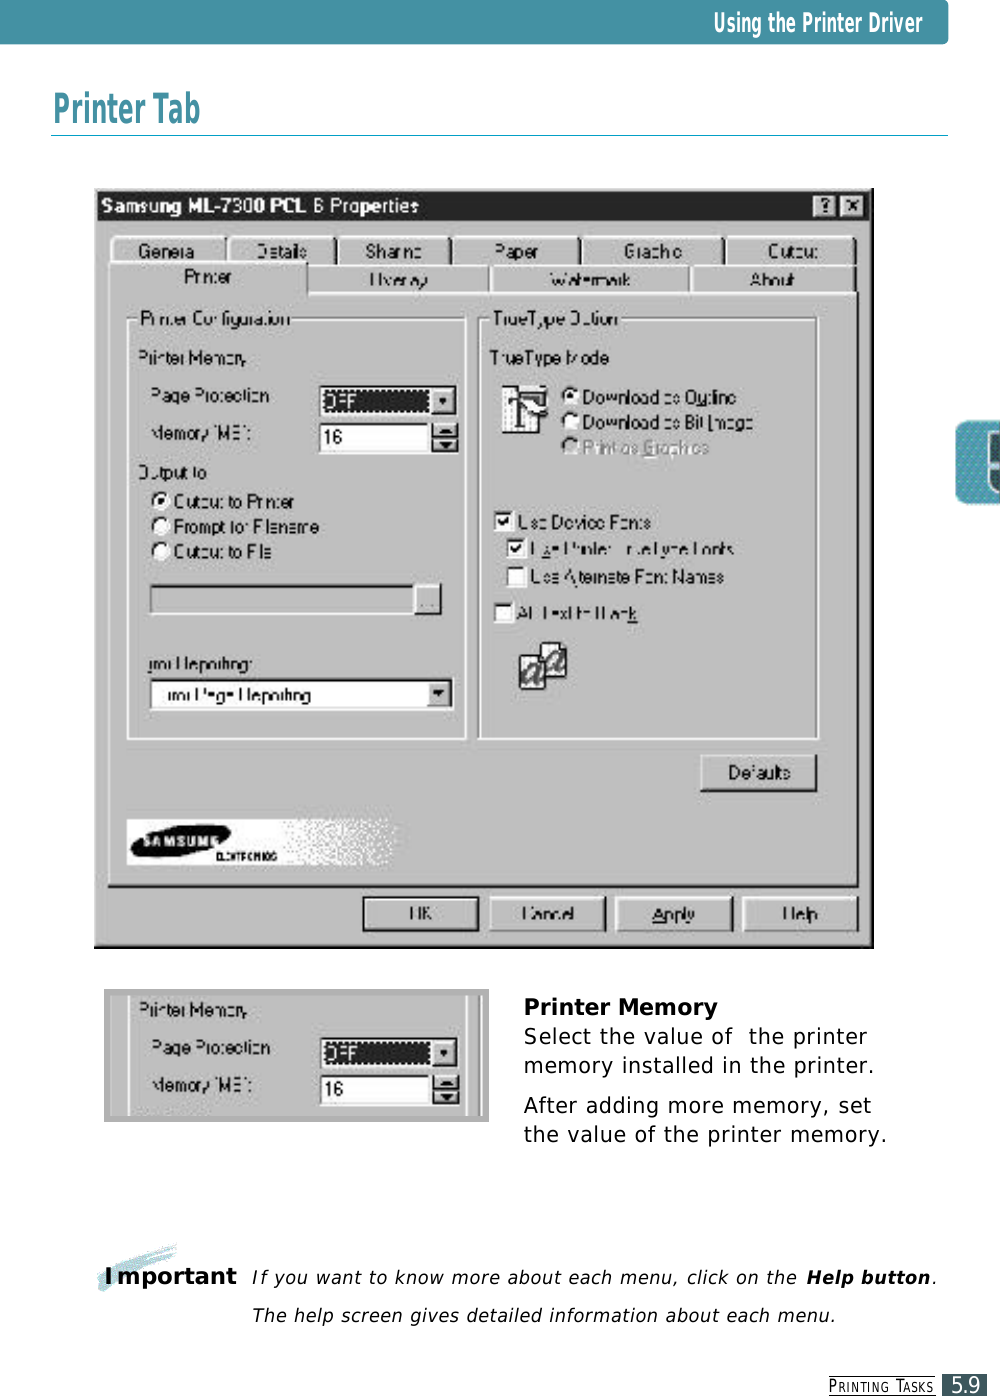 PR I N T I N G TA S K S5.9Printer TabPrinter MemorySelect the value of  the printermemory installed in the printer.After adding more memory, setthe value of the printer memory.ImportantIf you want to know more about each menu, click on the Help button.The help screen gives detailed information about each menu.Using the Printer Driver